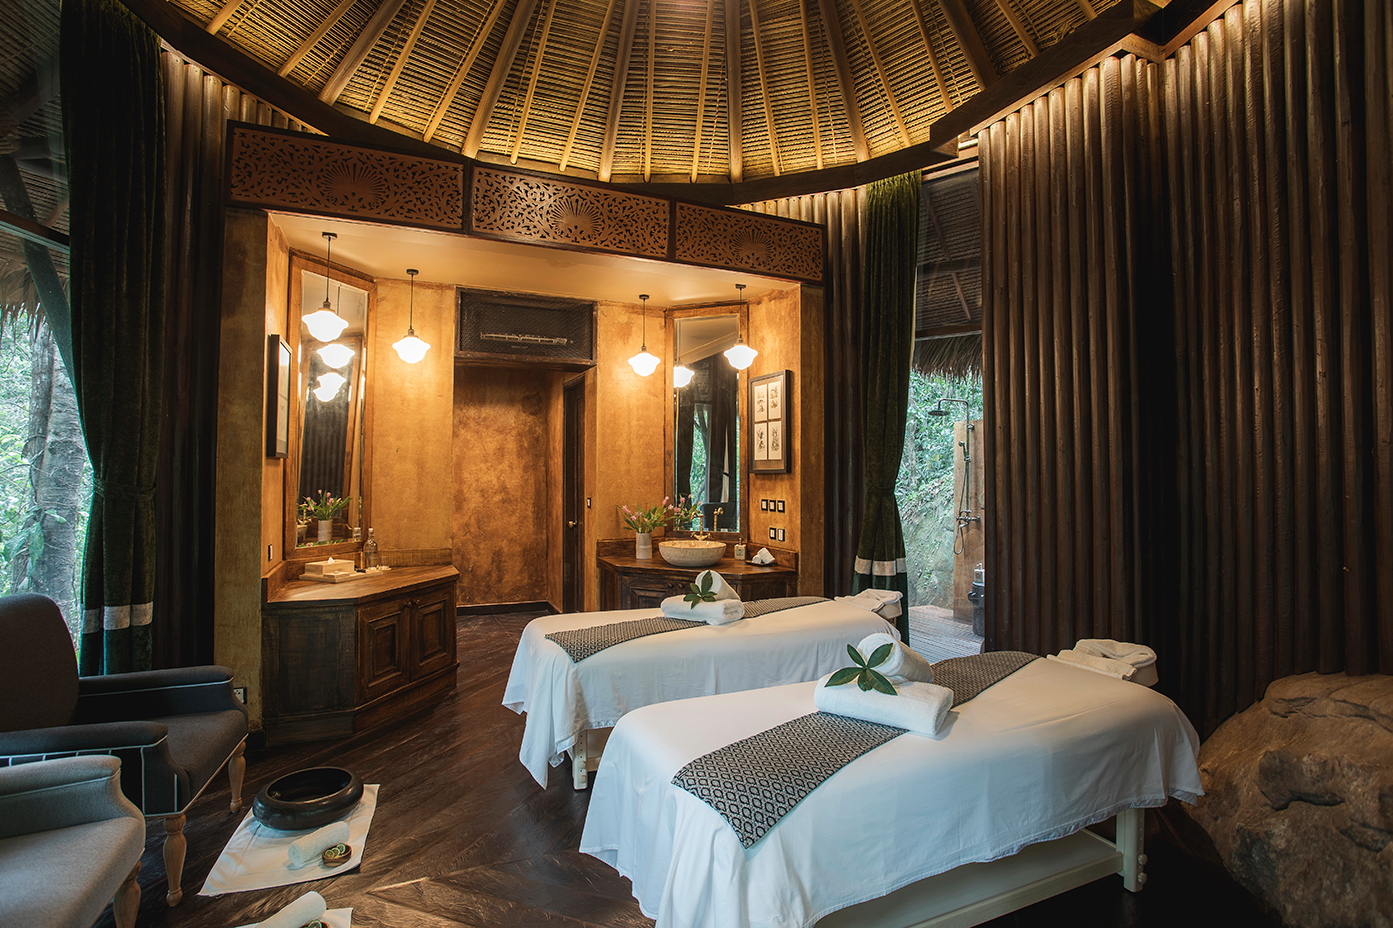 The Bensley Collection - Shinta Mani Wild, a luxury jungle camp in Cambodia, has opened a Khmer Tonics Spa that uses chemical-free tonics made from a mix of medicinal plants, herbs and spices all of which can be found in the rainforest that surrounds the resort. Click to enlarge.